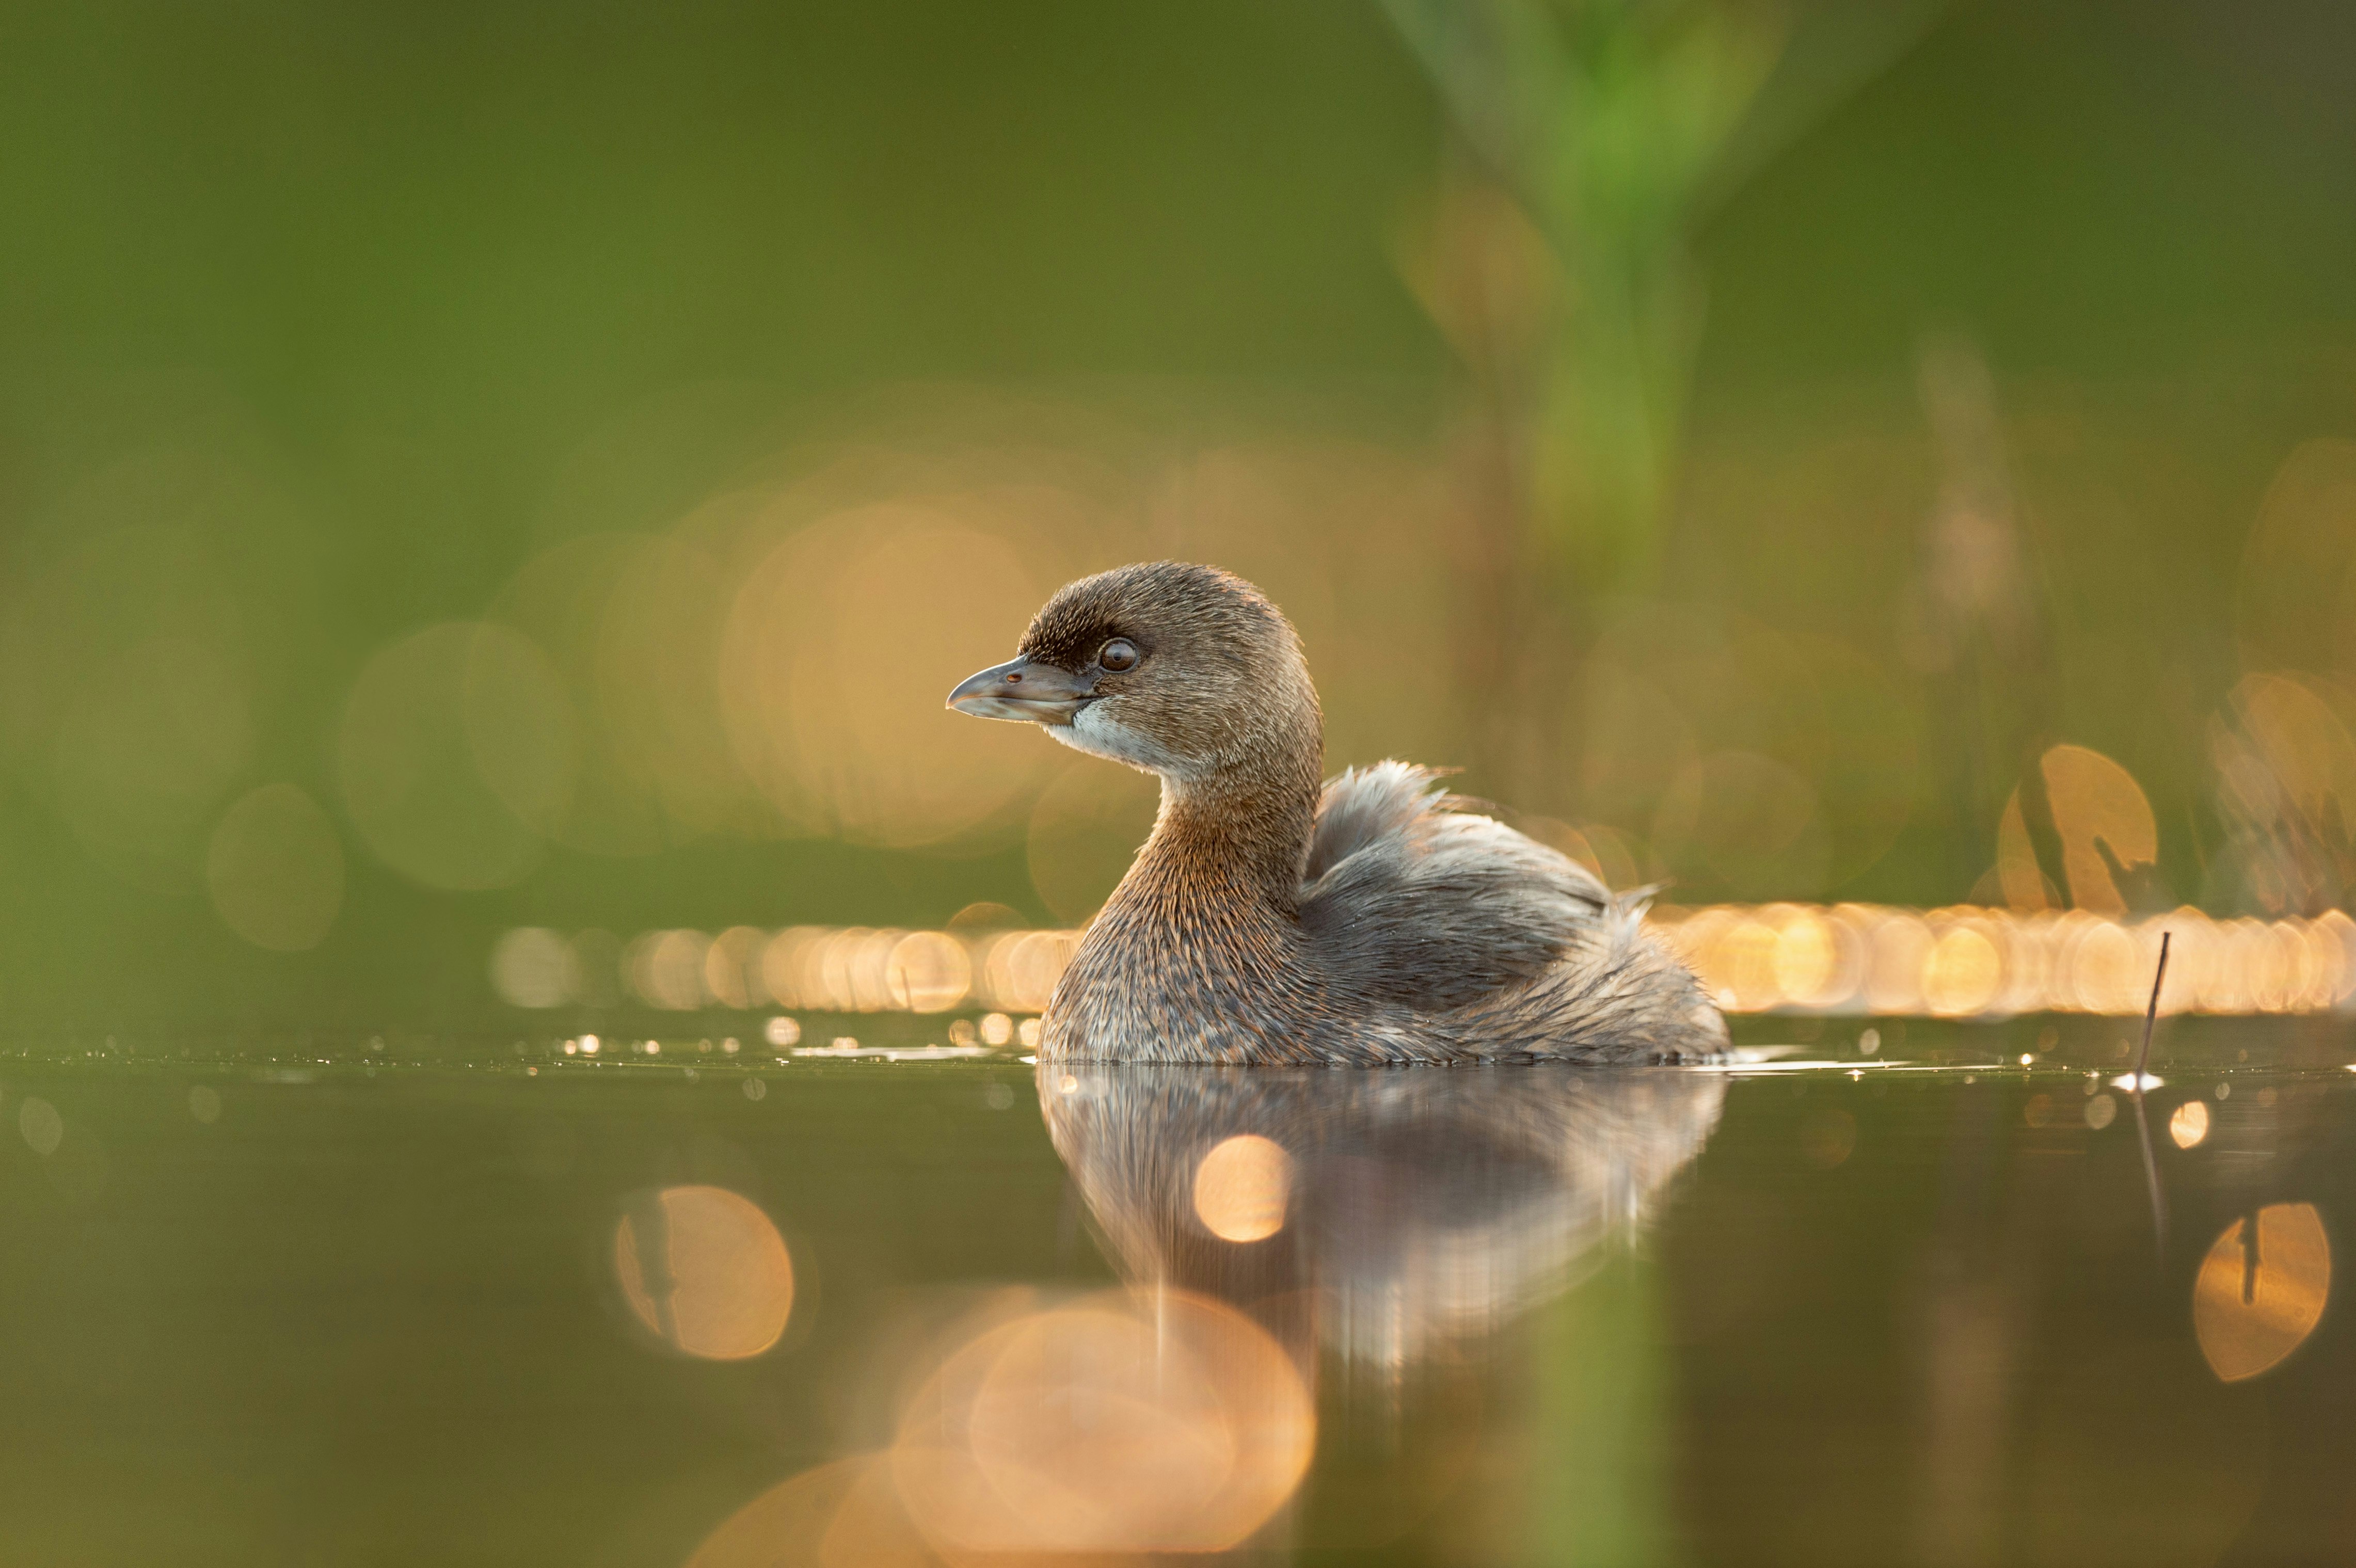 grey duck on water during daytime